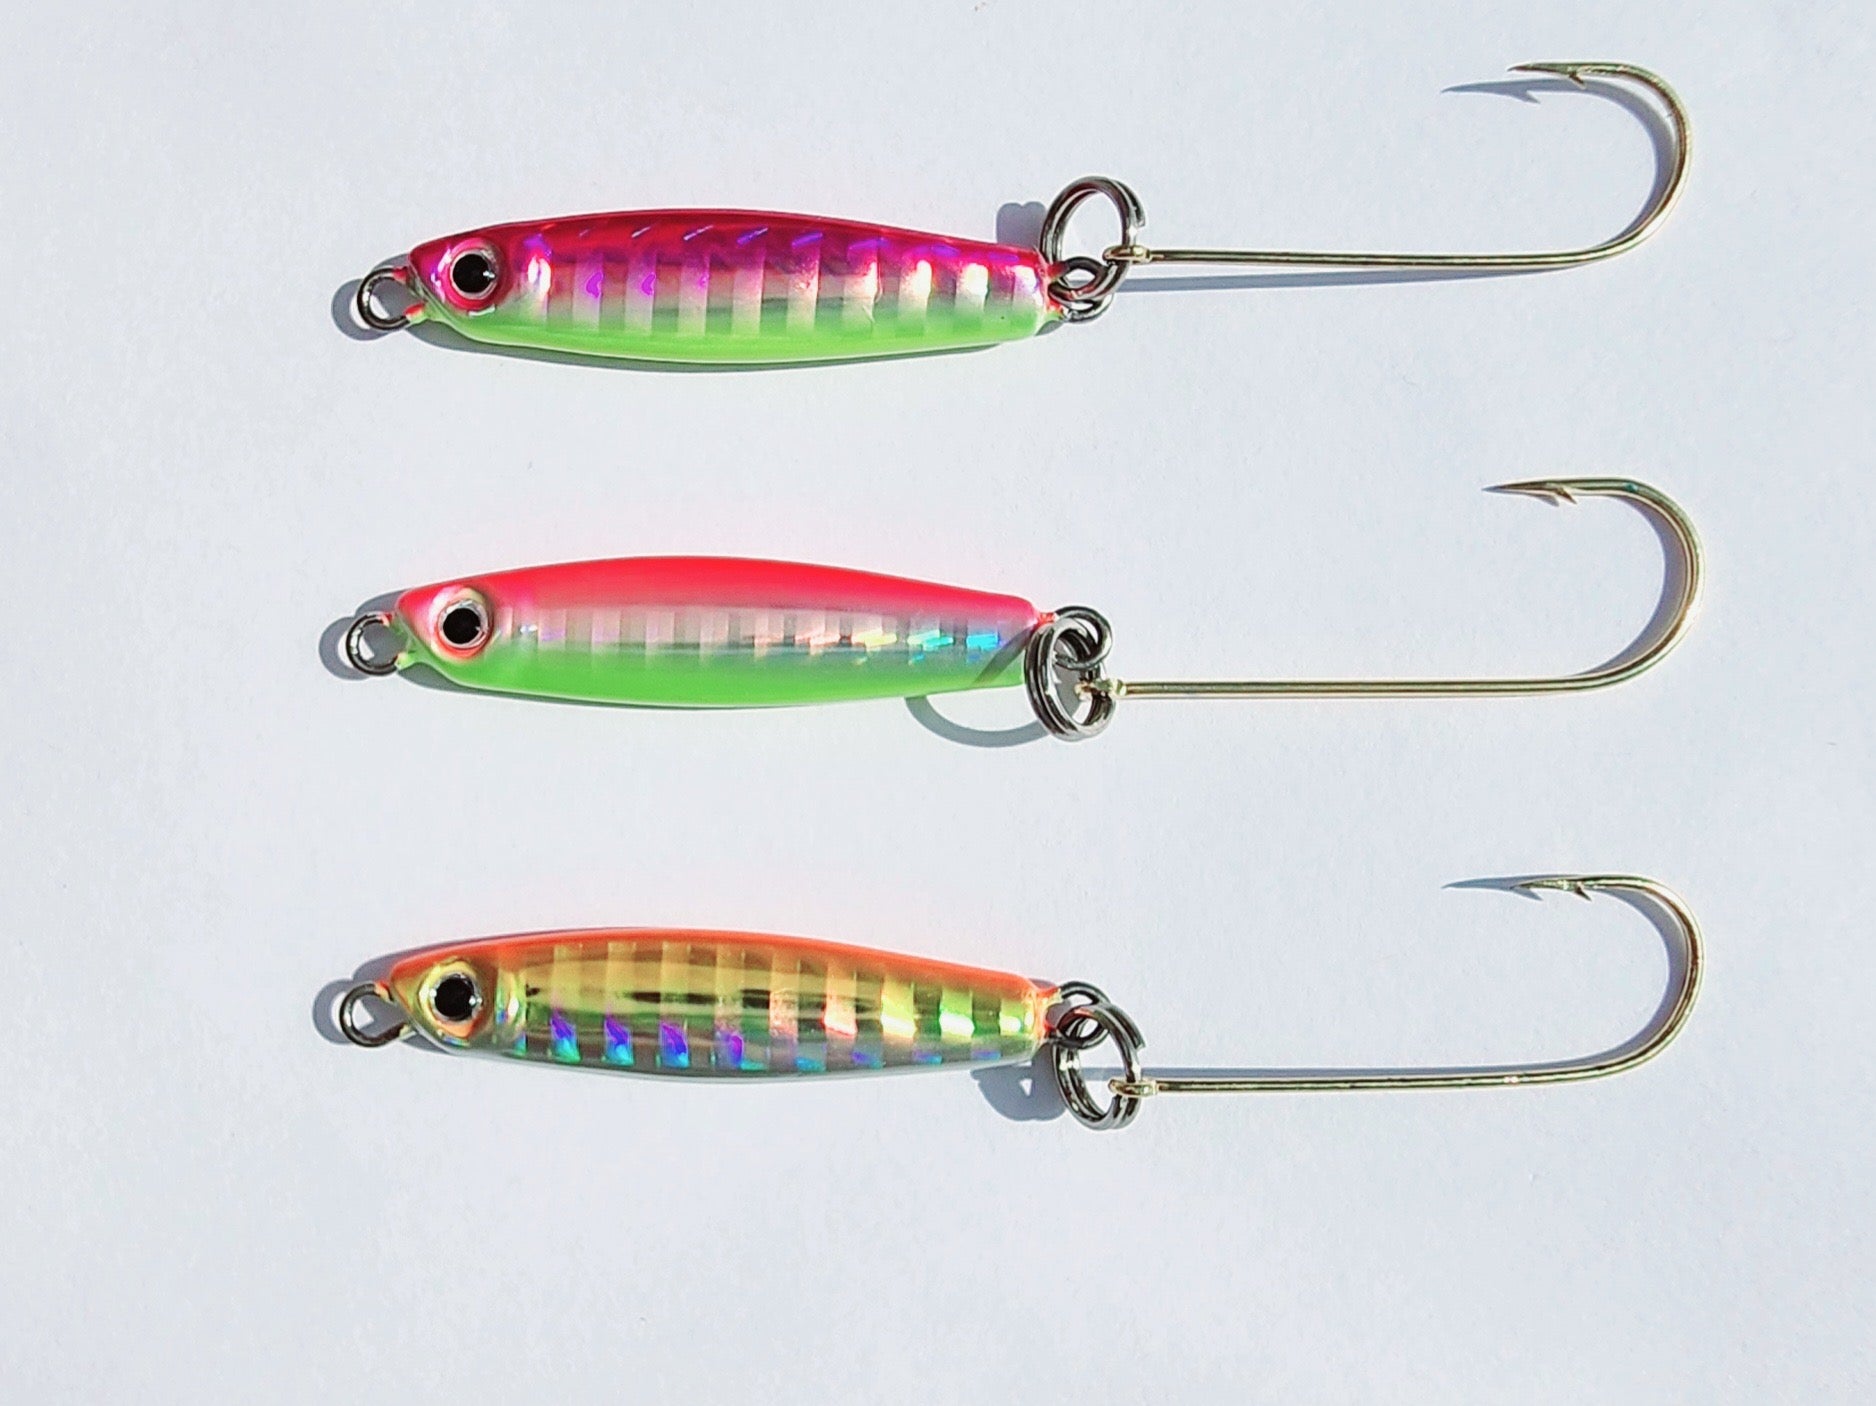 LIMITED EDITION - FUCHSIA CHARTREUSE Jelifish USA Snagless Crappie Bomb®